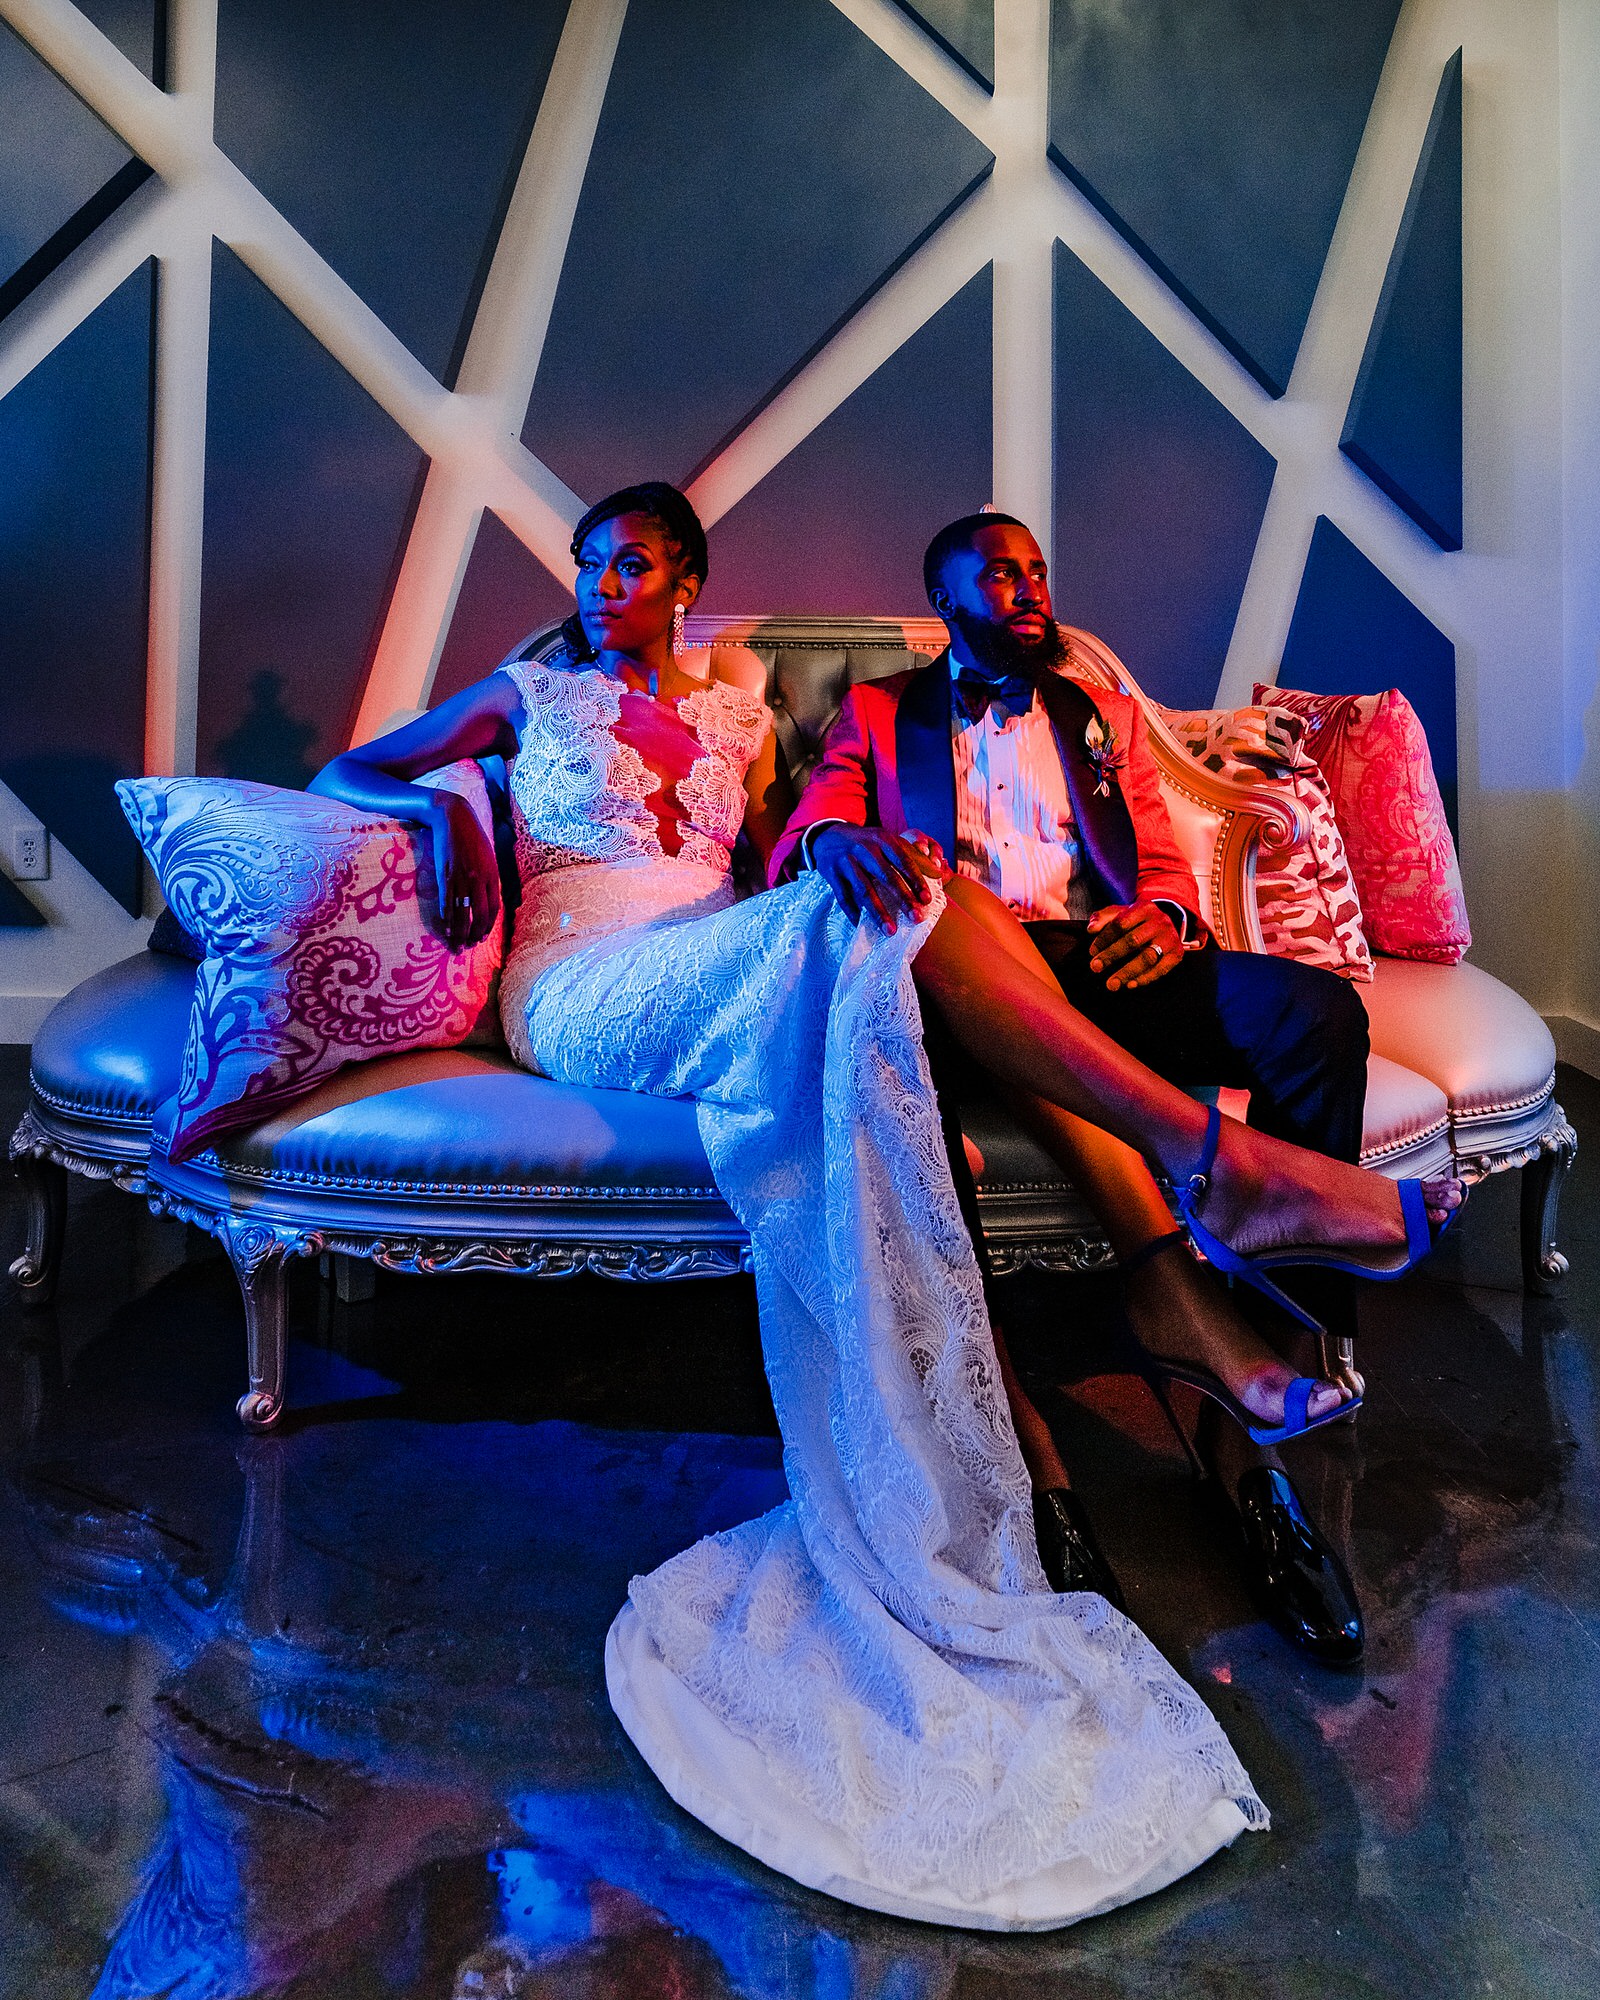 Dramatically lit portrait of a bride and groom sitting on a couch. The groom is lit with red light and the bride is lit with blue light. 